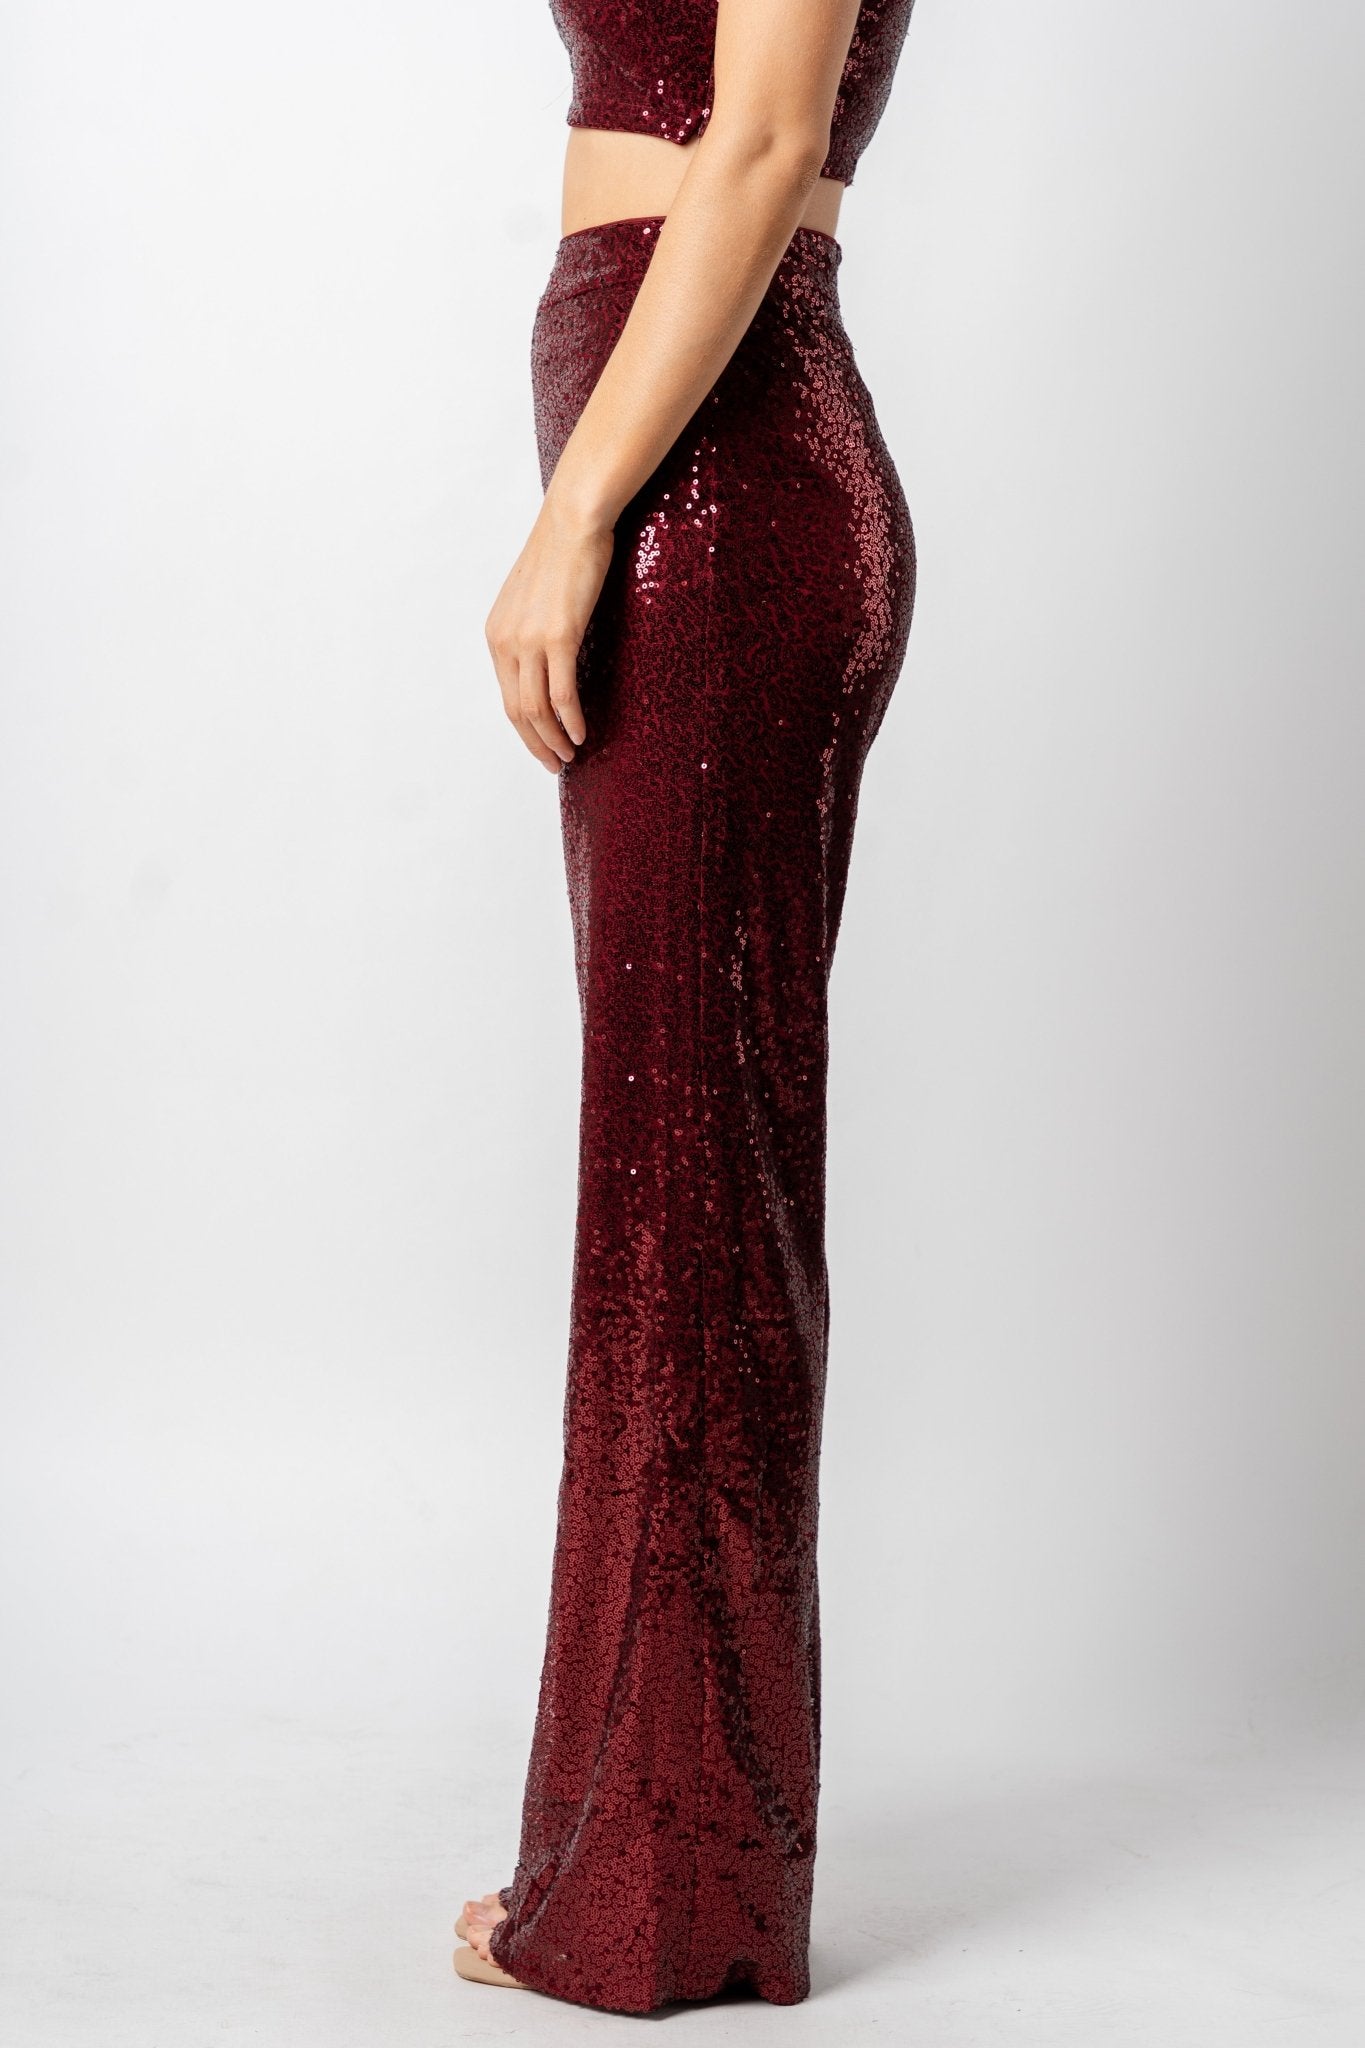 SEQUINS FLARED DRESS PANTS - CHAMPAGNE